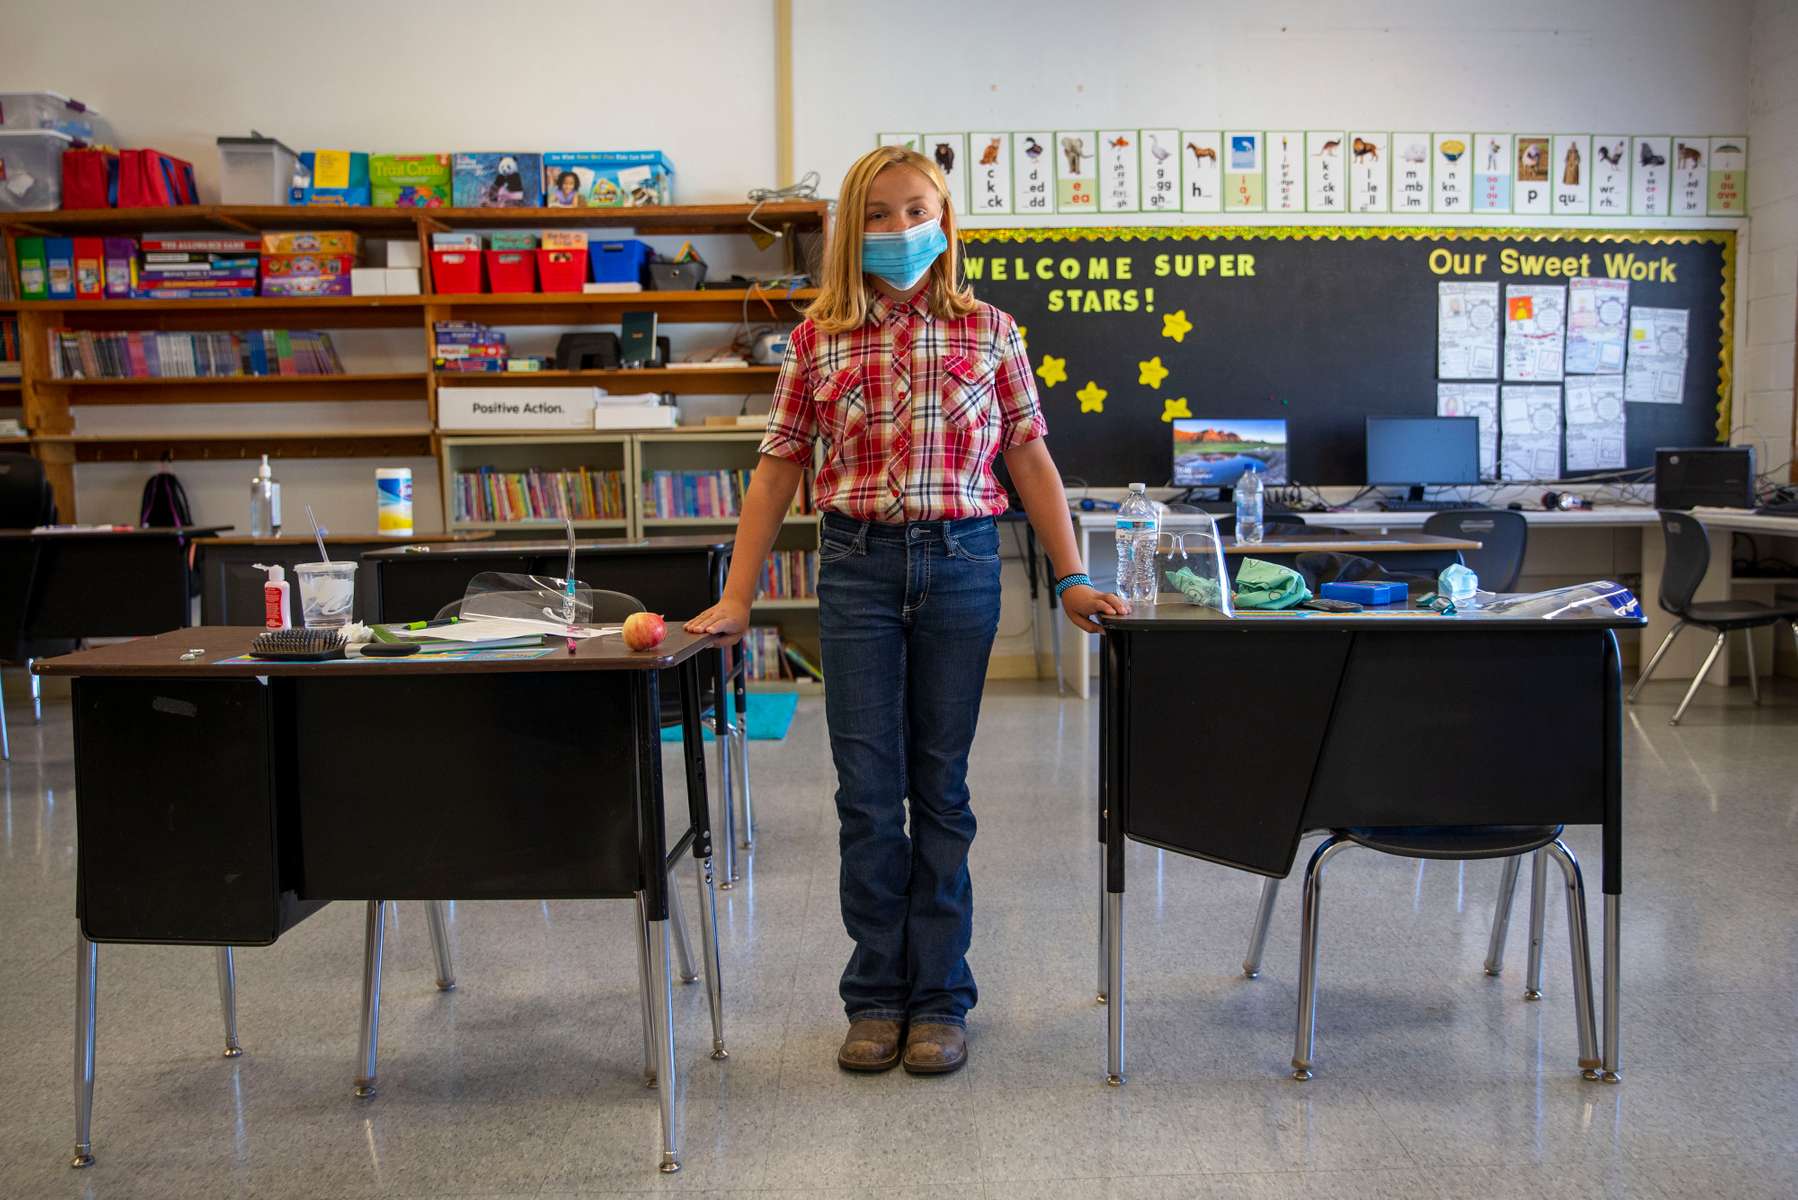 Sixth grader Katie Newton in her classroom Sept. 2, 2020, in Spray, Oregon. Newton has been a Spray student her whole life. “We actually get to go to school and, you know, we get to play outside and actually get to interact and stuff,” Newton said.